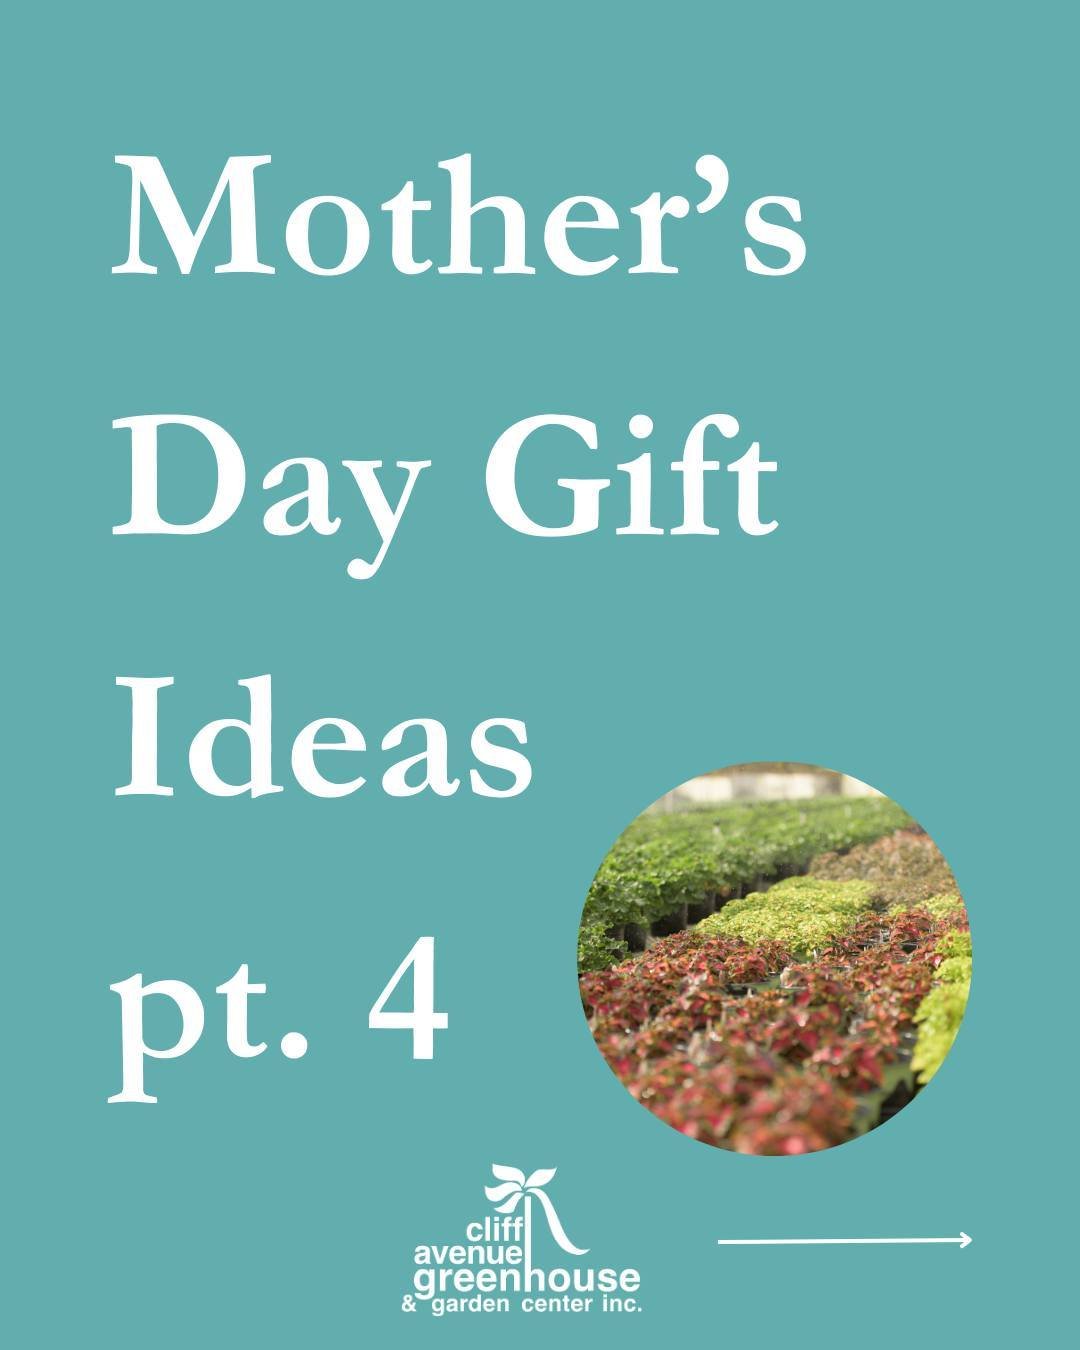 Mother's Day Gift Guide pt. 4💖 Fresh flowers are ALWAYS the best way to go, if you're unsure! Pick up a fresh arrangement, bouquet, or get a little creative and add a ceramic fish as a cute detail😊